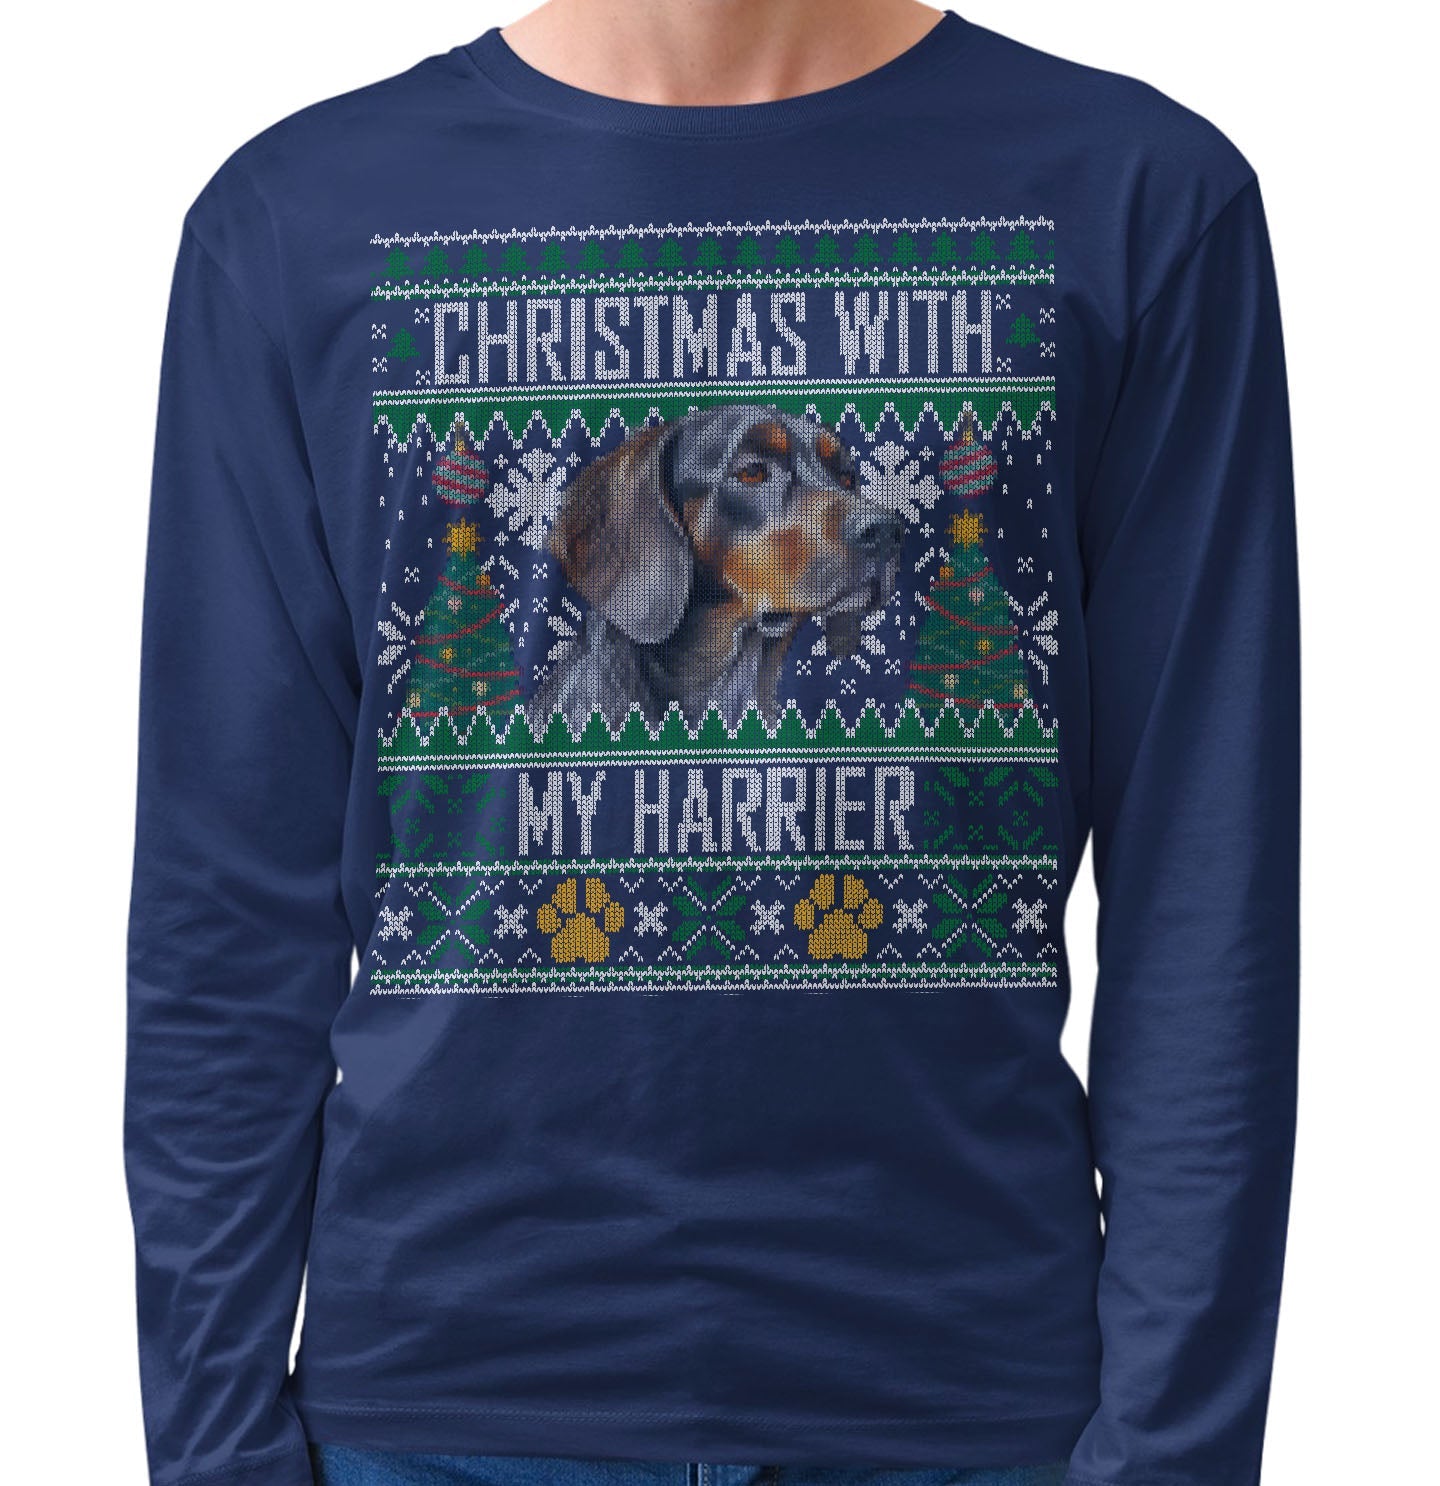 Ugly Sweater Christmas with My Harrier - Adult Unisex Long Sleeve T-Shirt